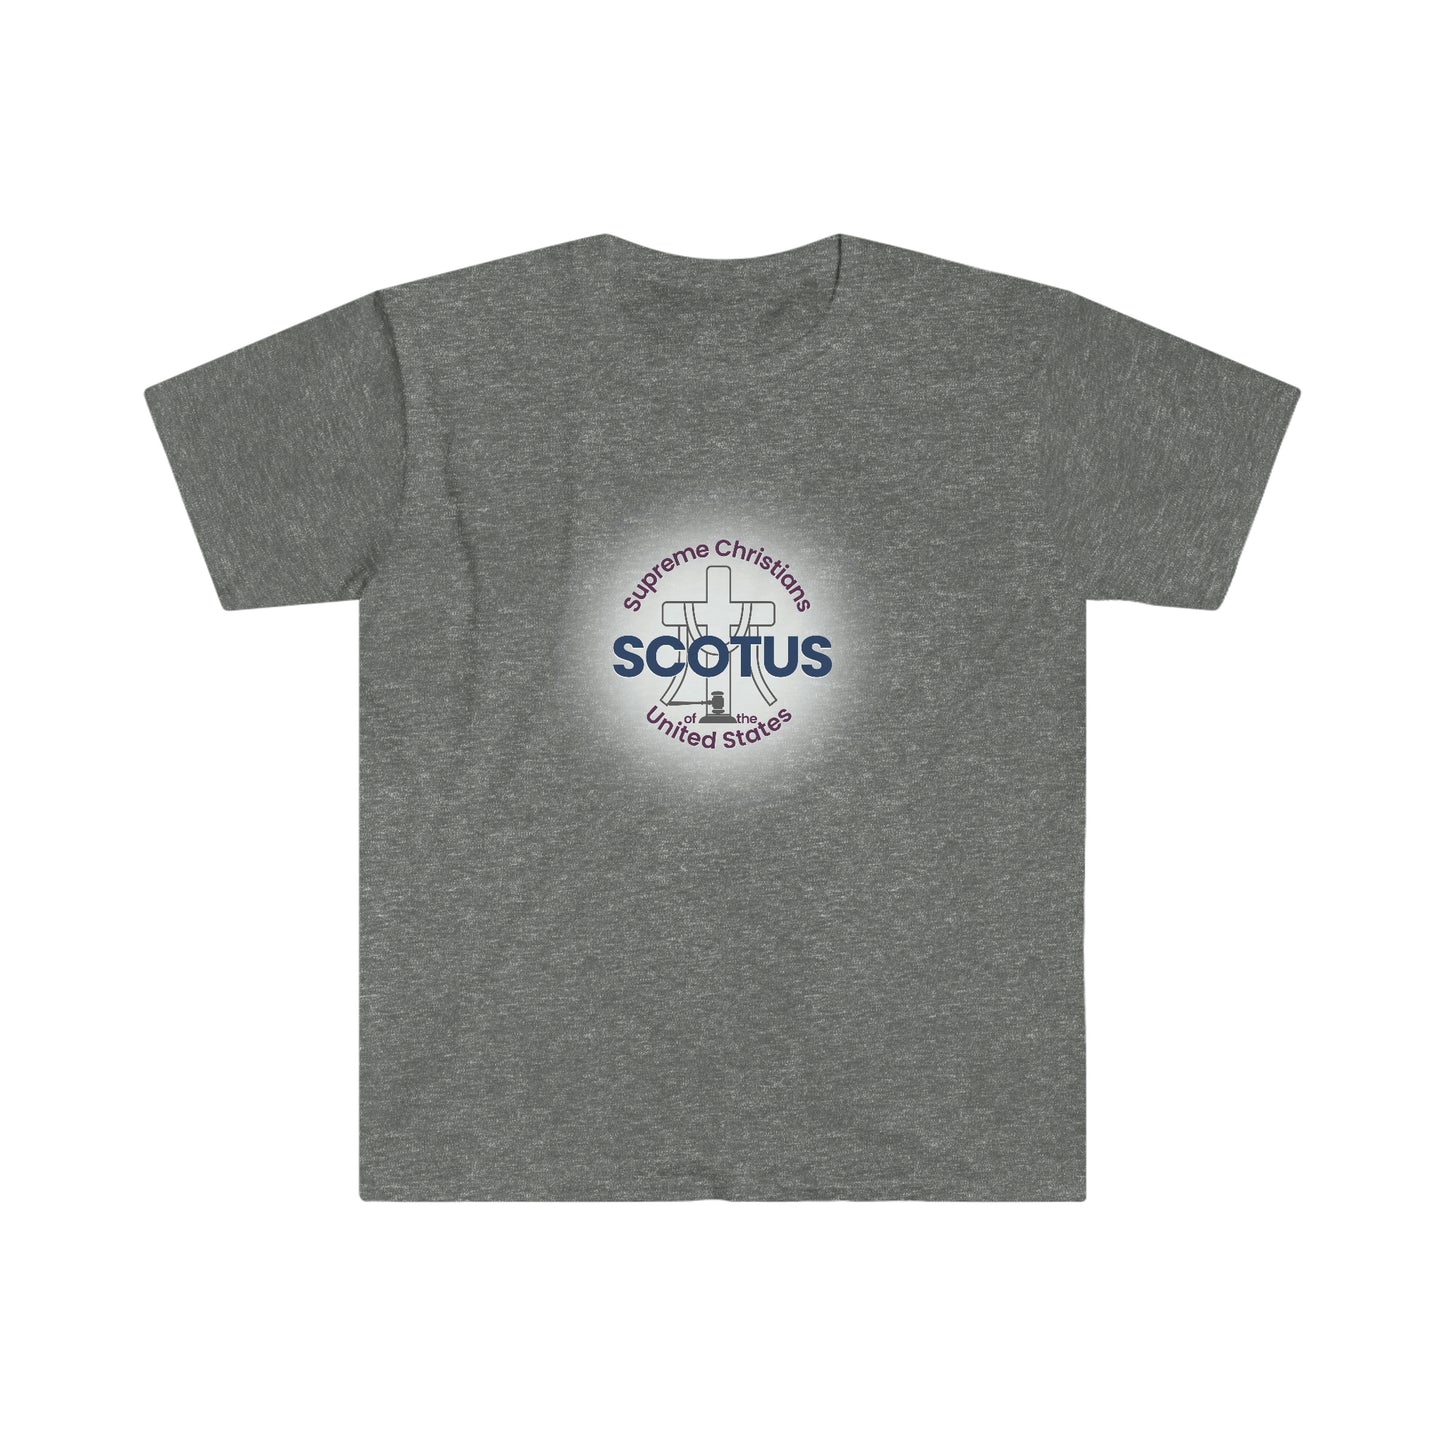 SCOTUS [Supreme Christians of the US] Unisex Softstyle T-Shirt